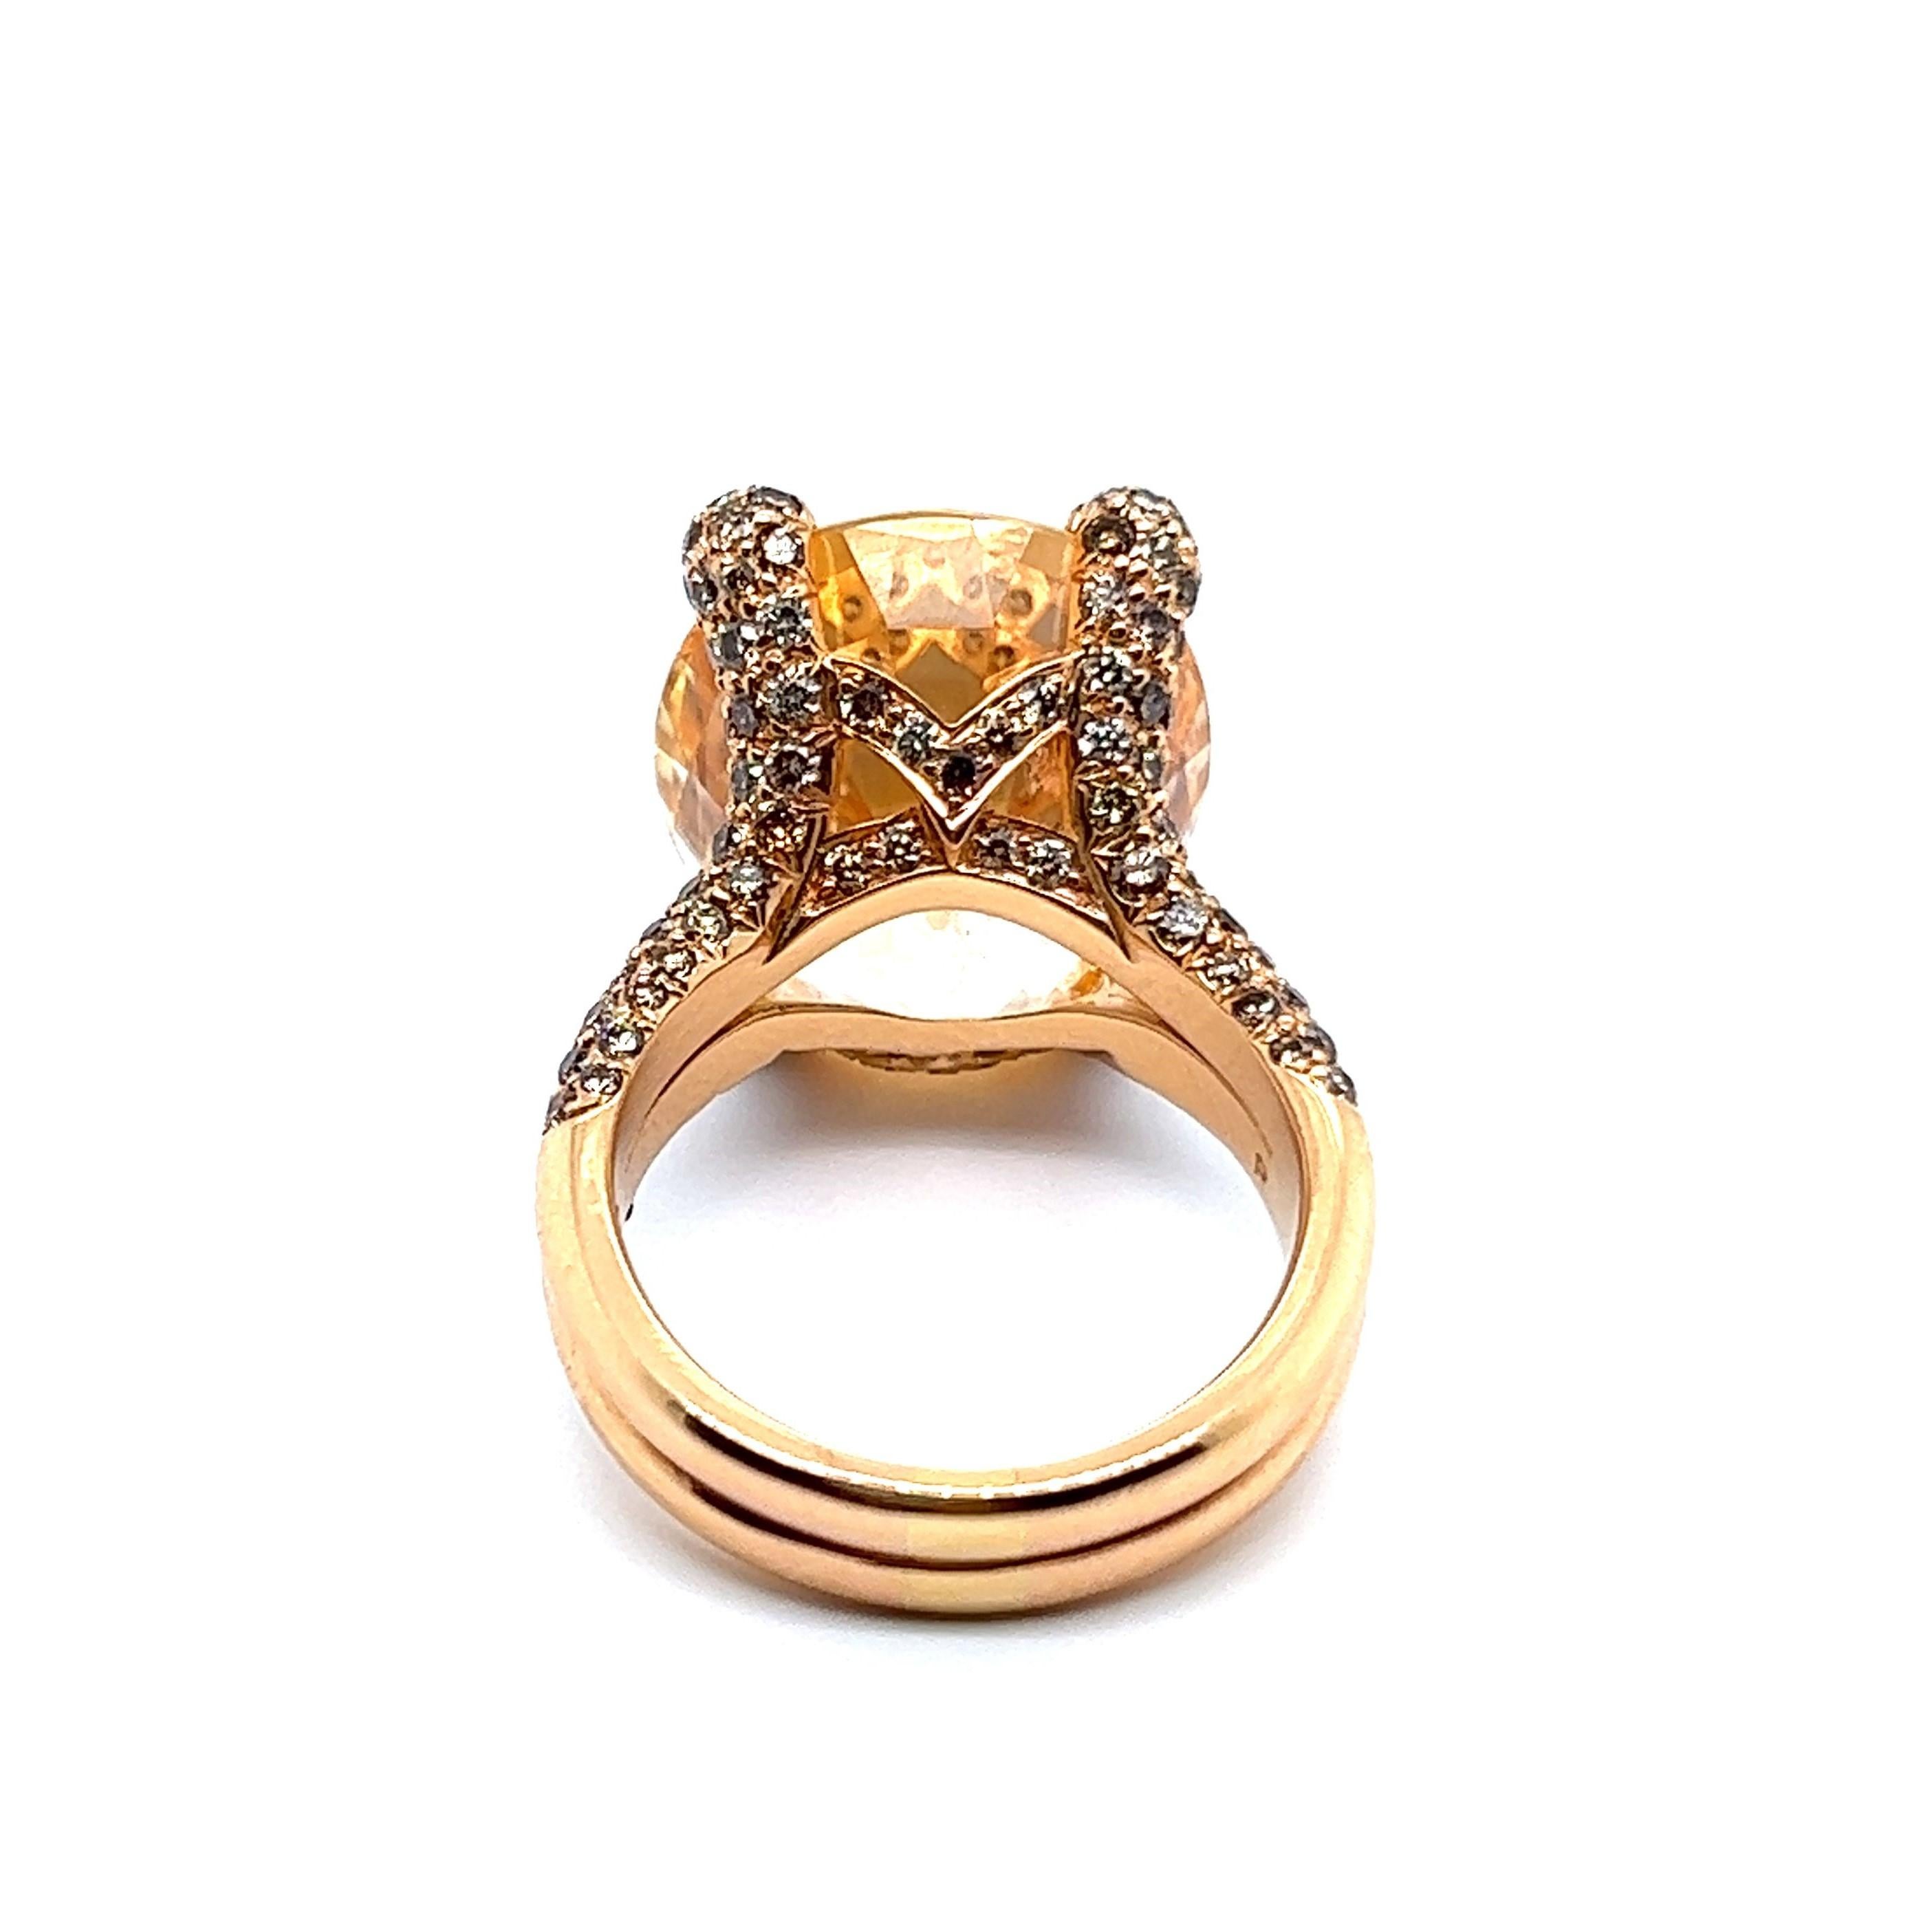 Oval Cut Exceptional Yellow Sapphire and Diamond Ring in 18 Karat Yellow Gold